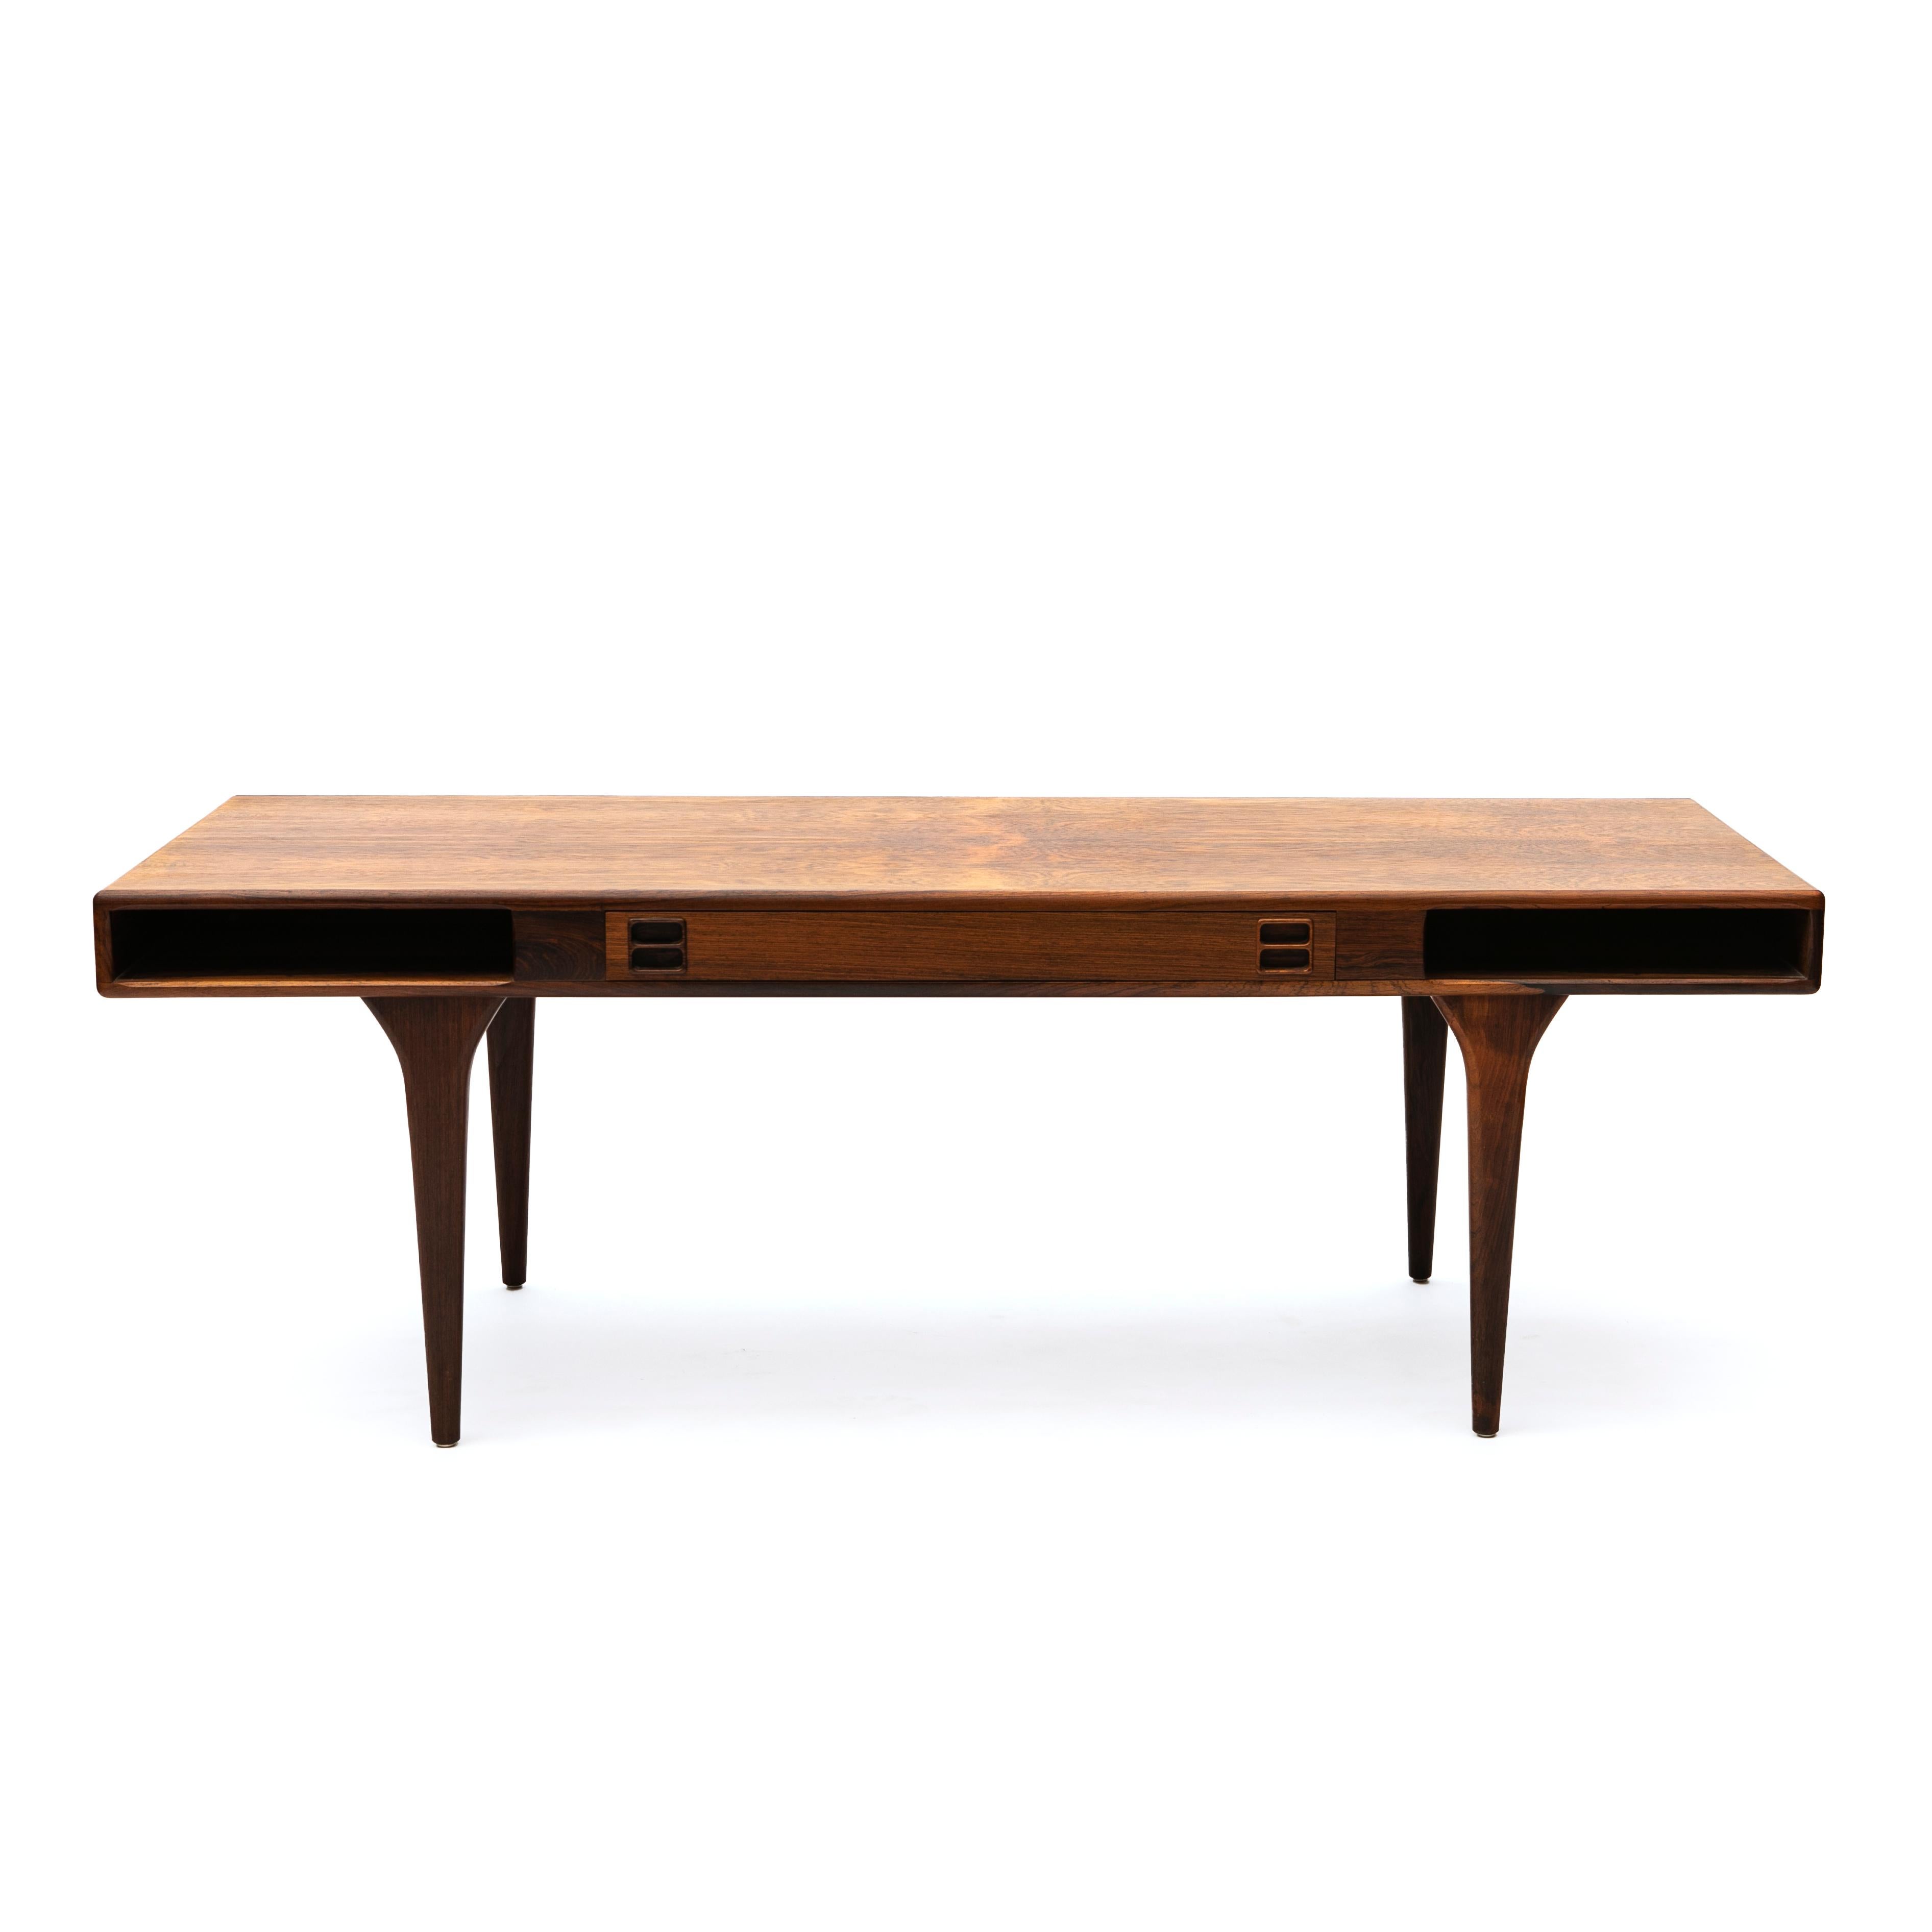 Nanna & Jørgen Ditzel design.

Rare rosewood cofee table designed by Nanna & Jørgen Ditzel.
Features one drawer and two open shelves on each side. Subtle curve to the legs.

Manufactured by CFC Silkeborg, Denmark, in the 1960's. Manufacturer’s